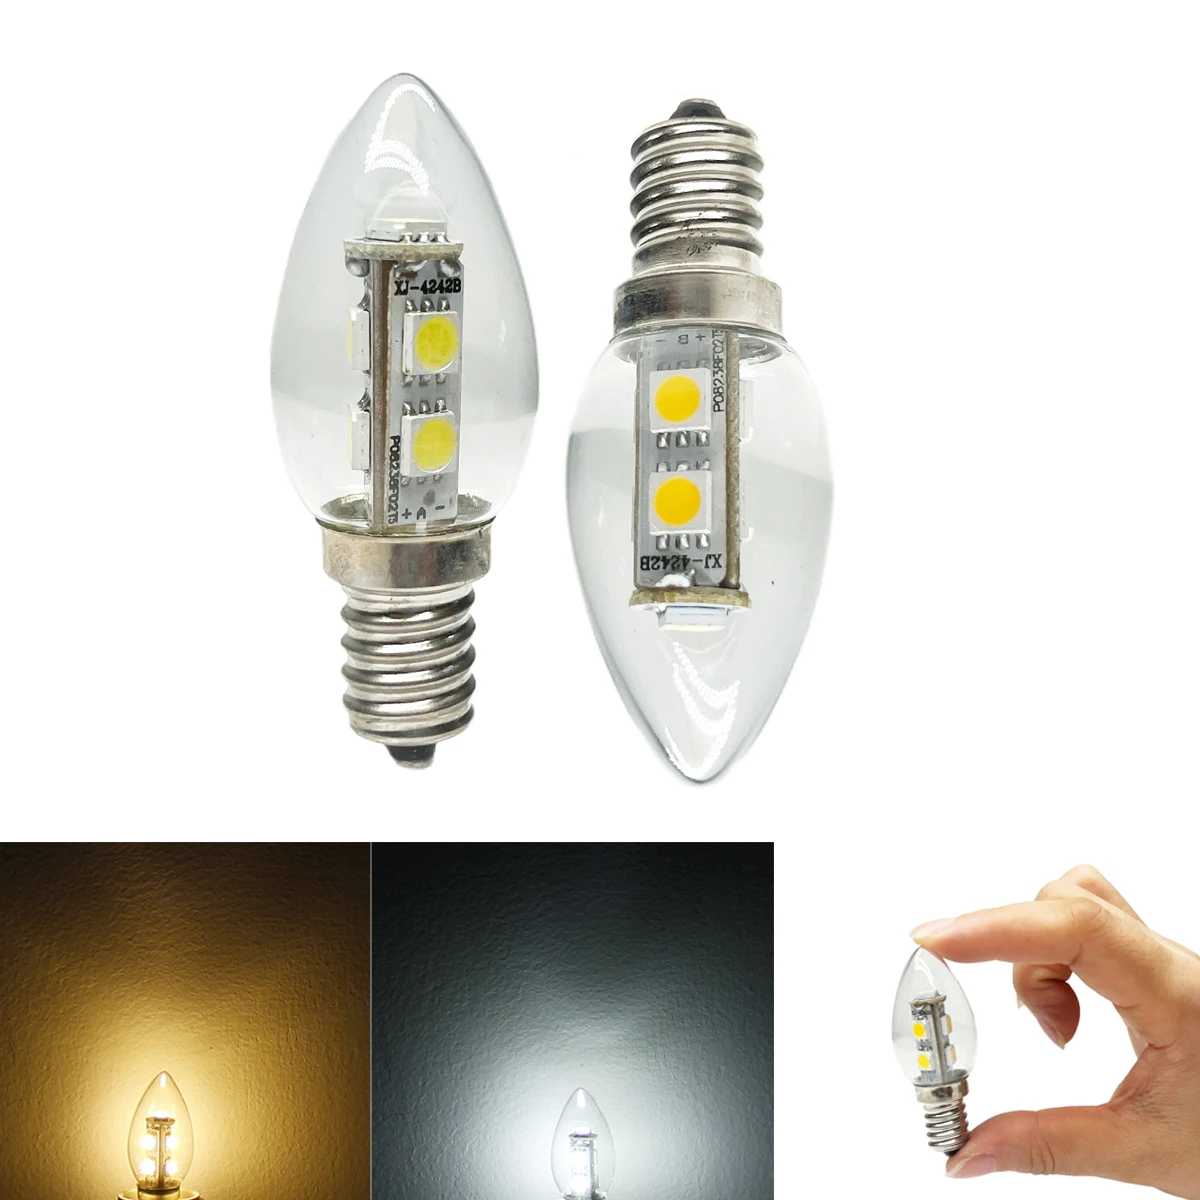 E12 LED Candelabra Candle Light Bulb 1W 5050 SMD Glass Shell Cold Warm White 15W Halogen Lamp Replacement For Chandelier Decor c25 e14 e12 led candelabra candle cob filament light bulbs 2w glass shell cold warm white ac 110v 220v lamps for chandelier